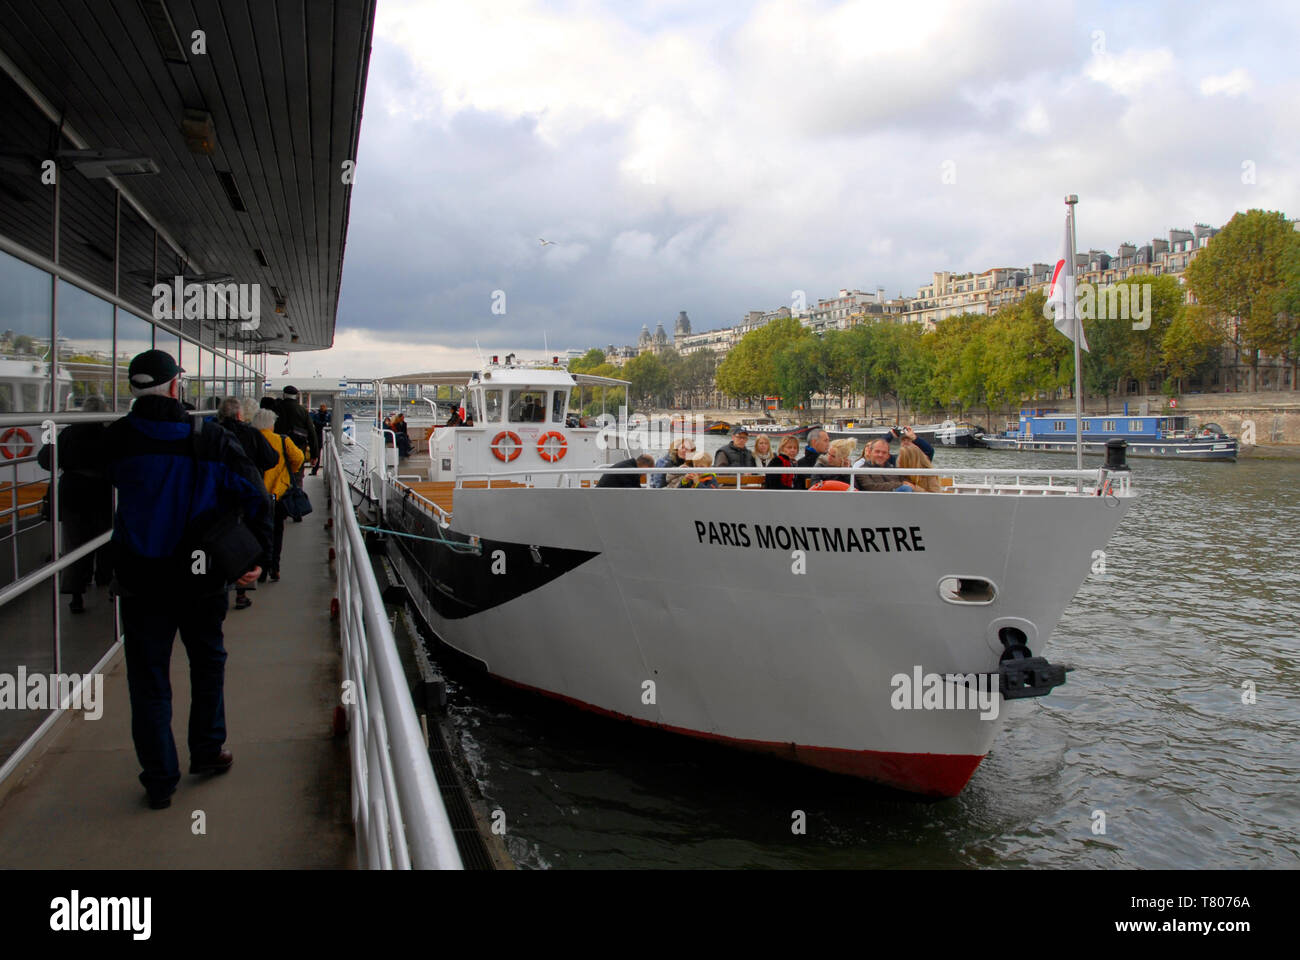 Passenfers embarking the 'Paris Monmartre' vessel for a boat trip on the river Seine, Paris, France Stock Photo